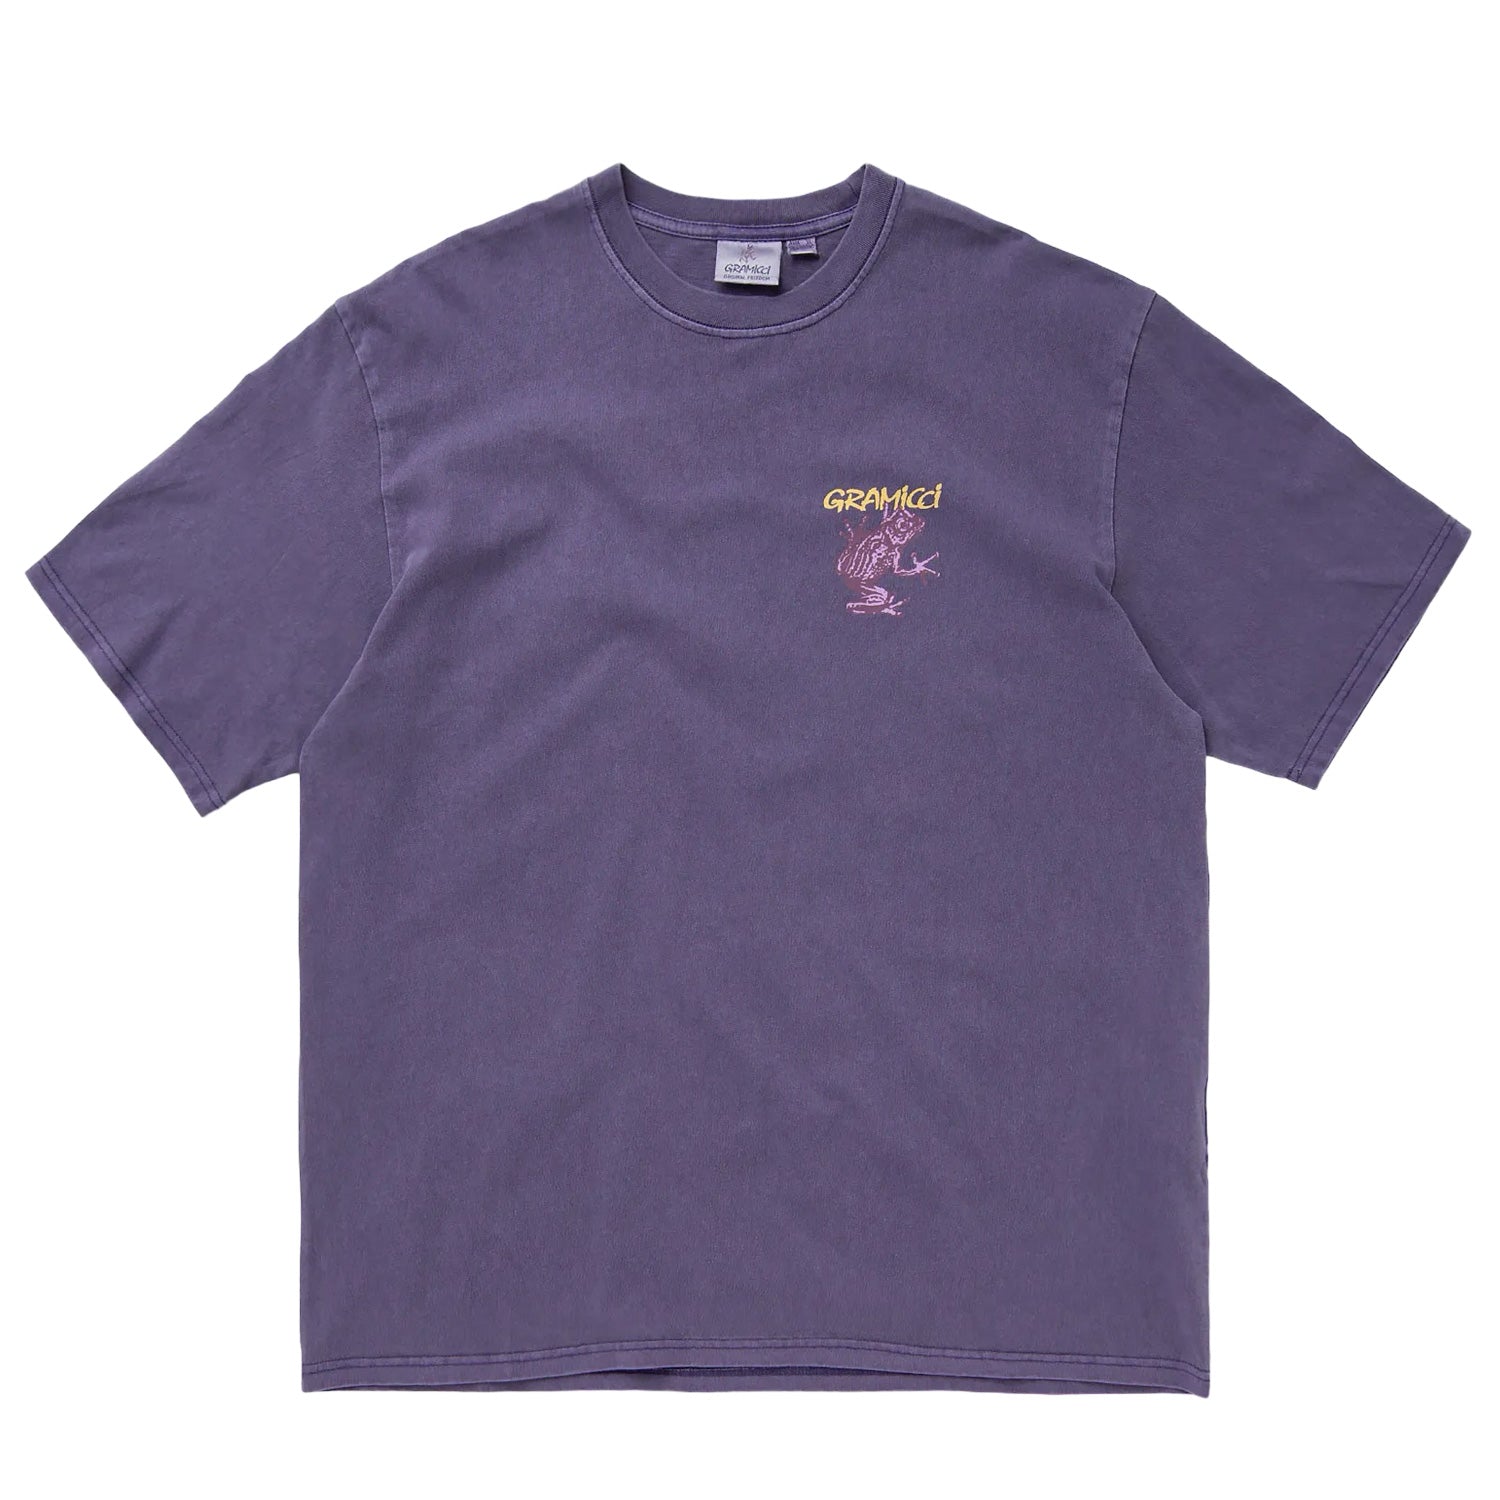 Purple gramicci short sleeve t-shirt with printed frog logo in purple and yellow on front and back. Free UK Shipping on orders over £50